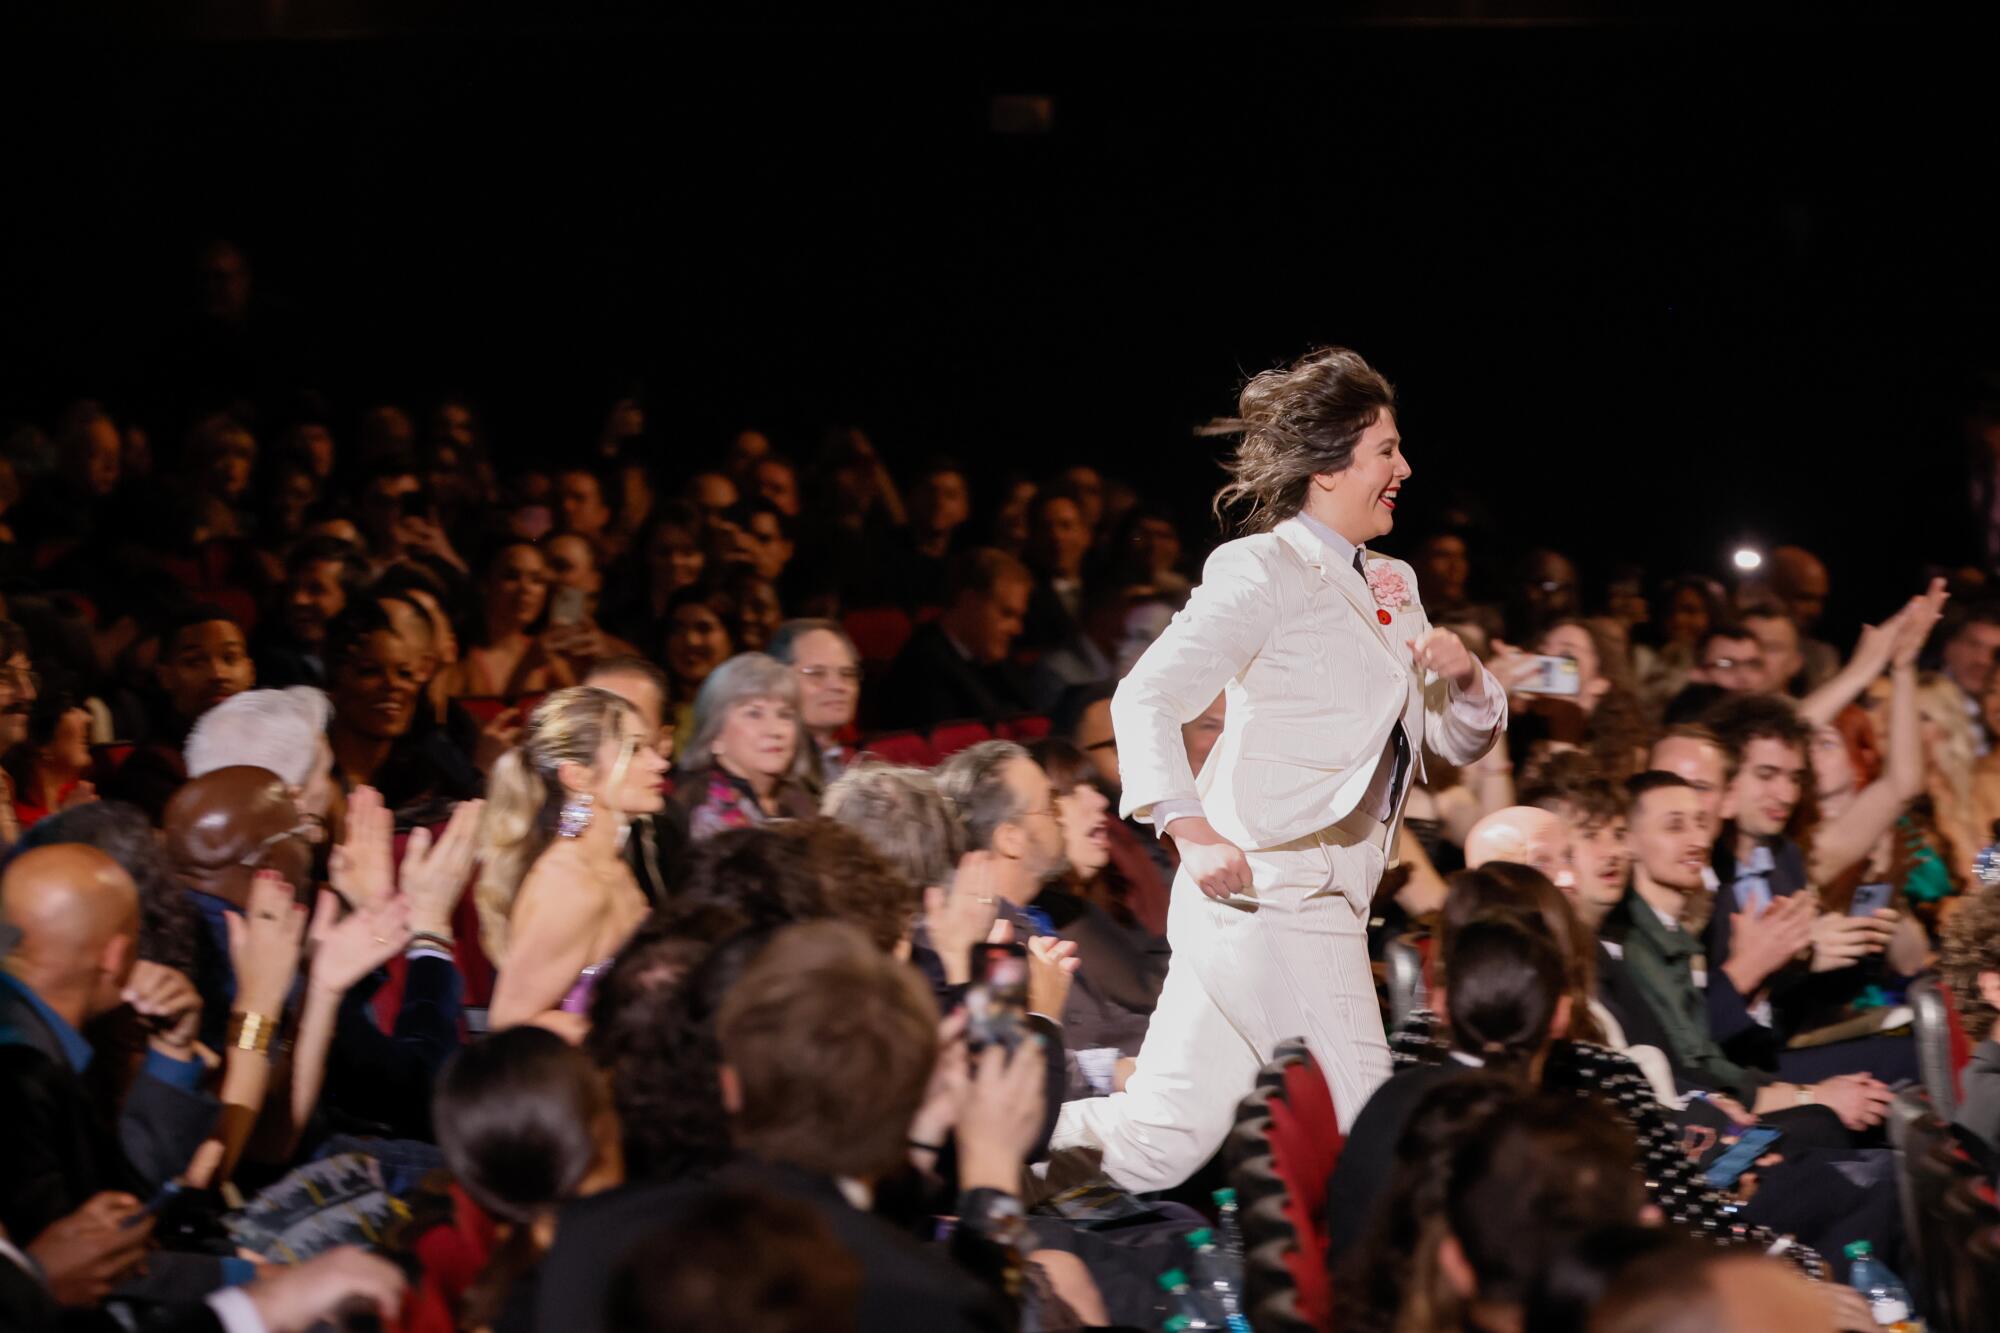 Lucy Dacus of Boygenius wears a white suit and runs up the aisle to accept a Grammy award